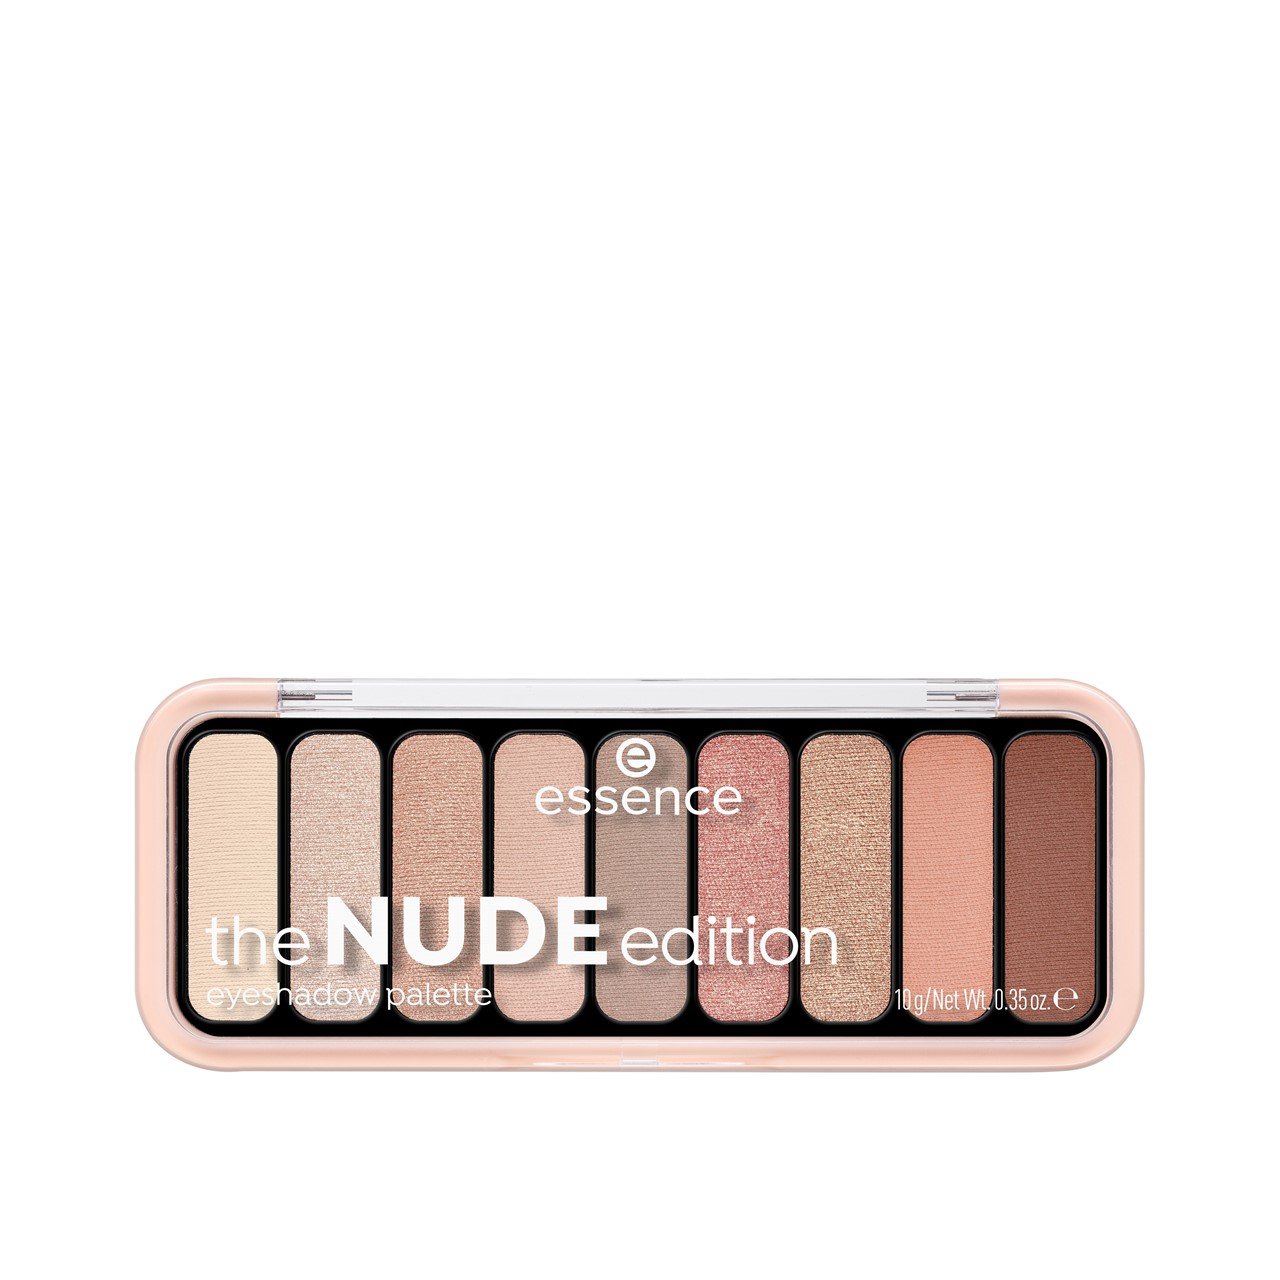 USA Buy essence Pretty Edition the NUDE Palette Nude 10g (0.35oz) · Eyeshadow In 10